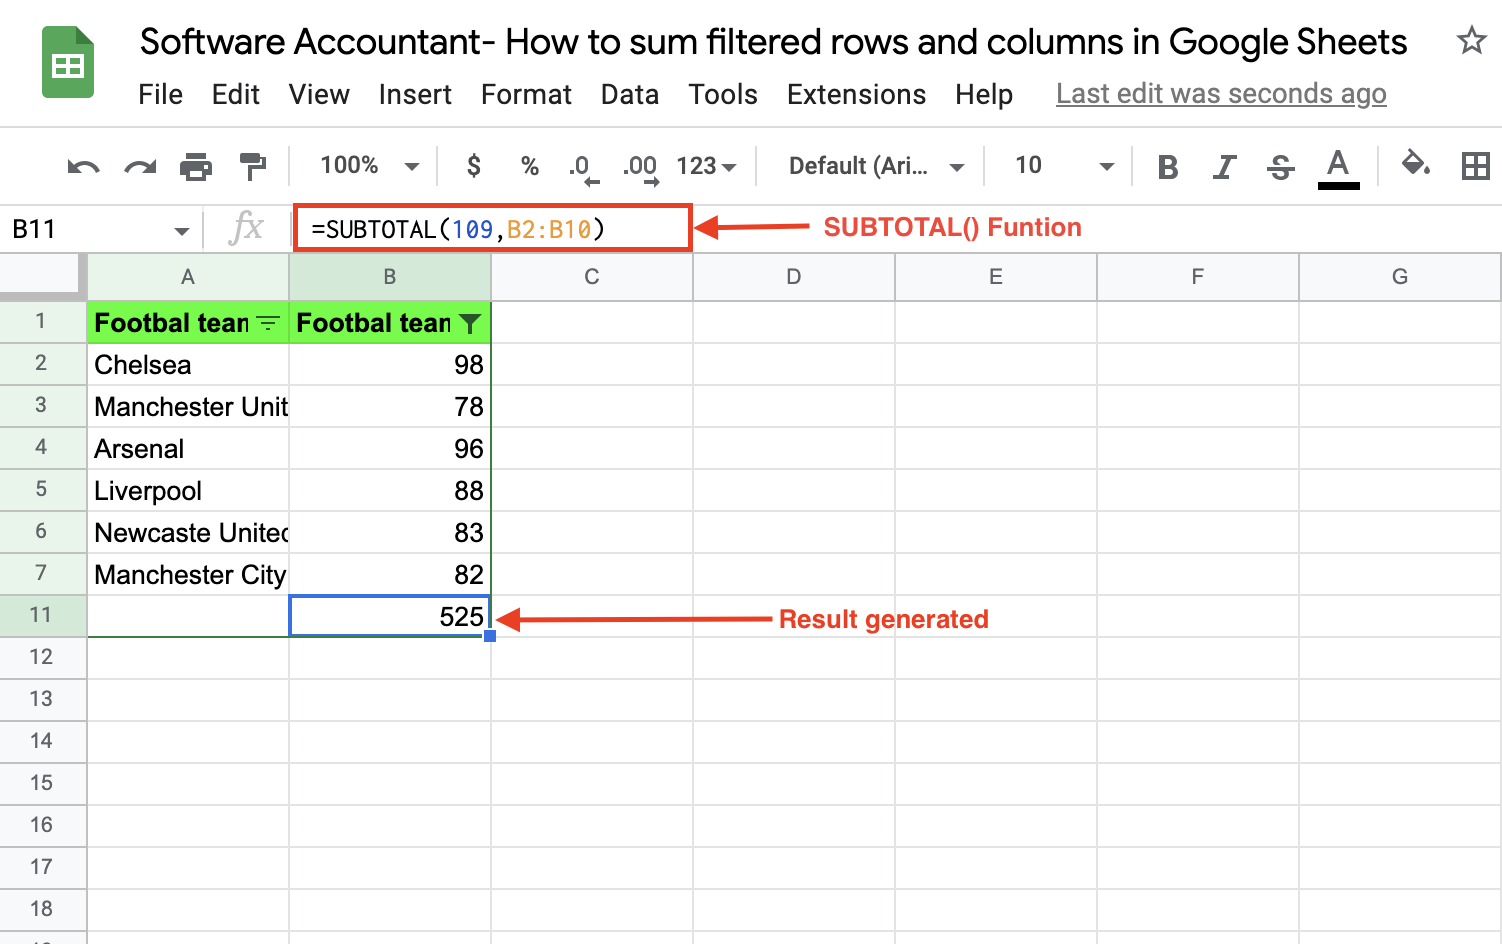 How to Sum Filtered Rows and Columns in Google Sheets